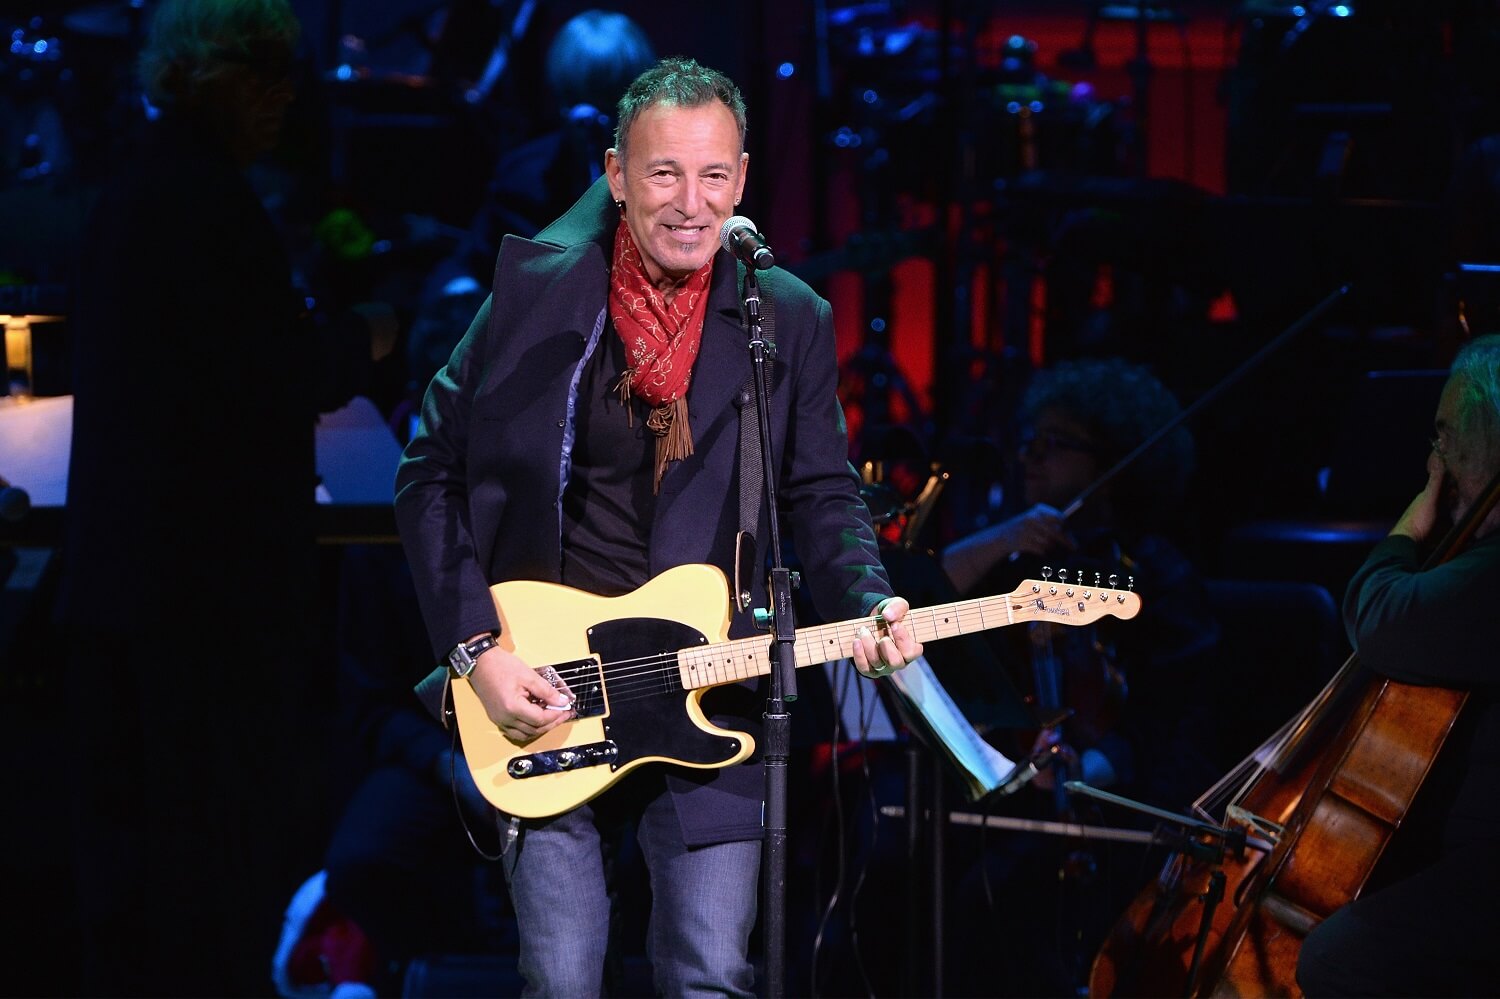 Bruce Springsteen finalizes new album, that will have influences of the 70s